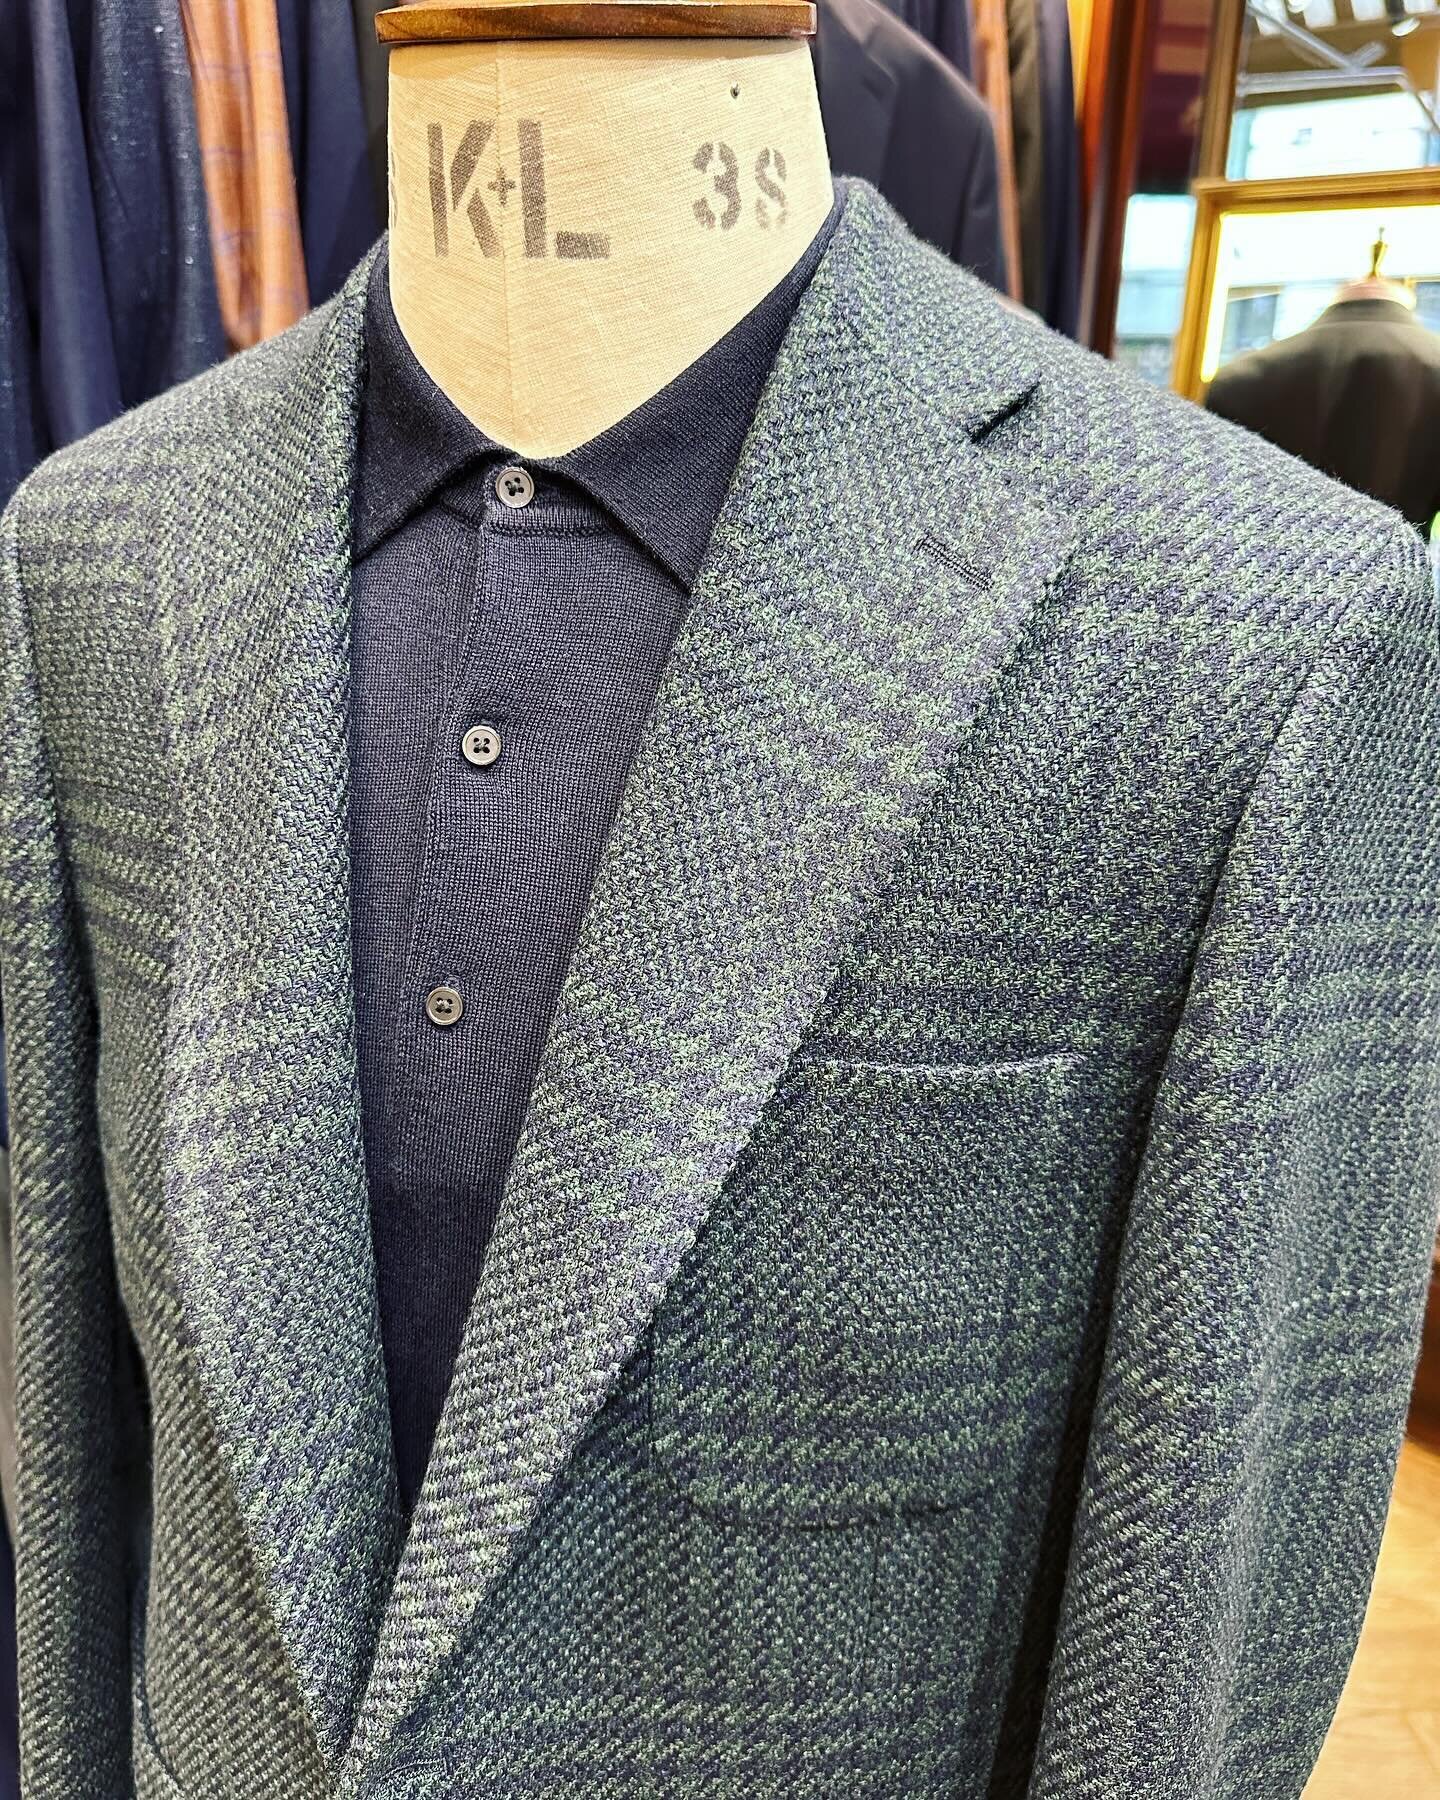 New Sports Jacket
Made from a heavy weight &lsquo;Silk Air&rsquo; by Loro Piana fabrics.
Fully unstructured with taped seams to finish the inside.

#sportsjacket
#casualwear
#denimshirt
#checkjacket
#weekendwear
#london
#moorgate
#tailors
#bespoke
#f